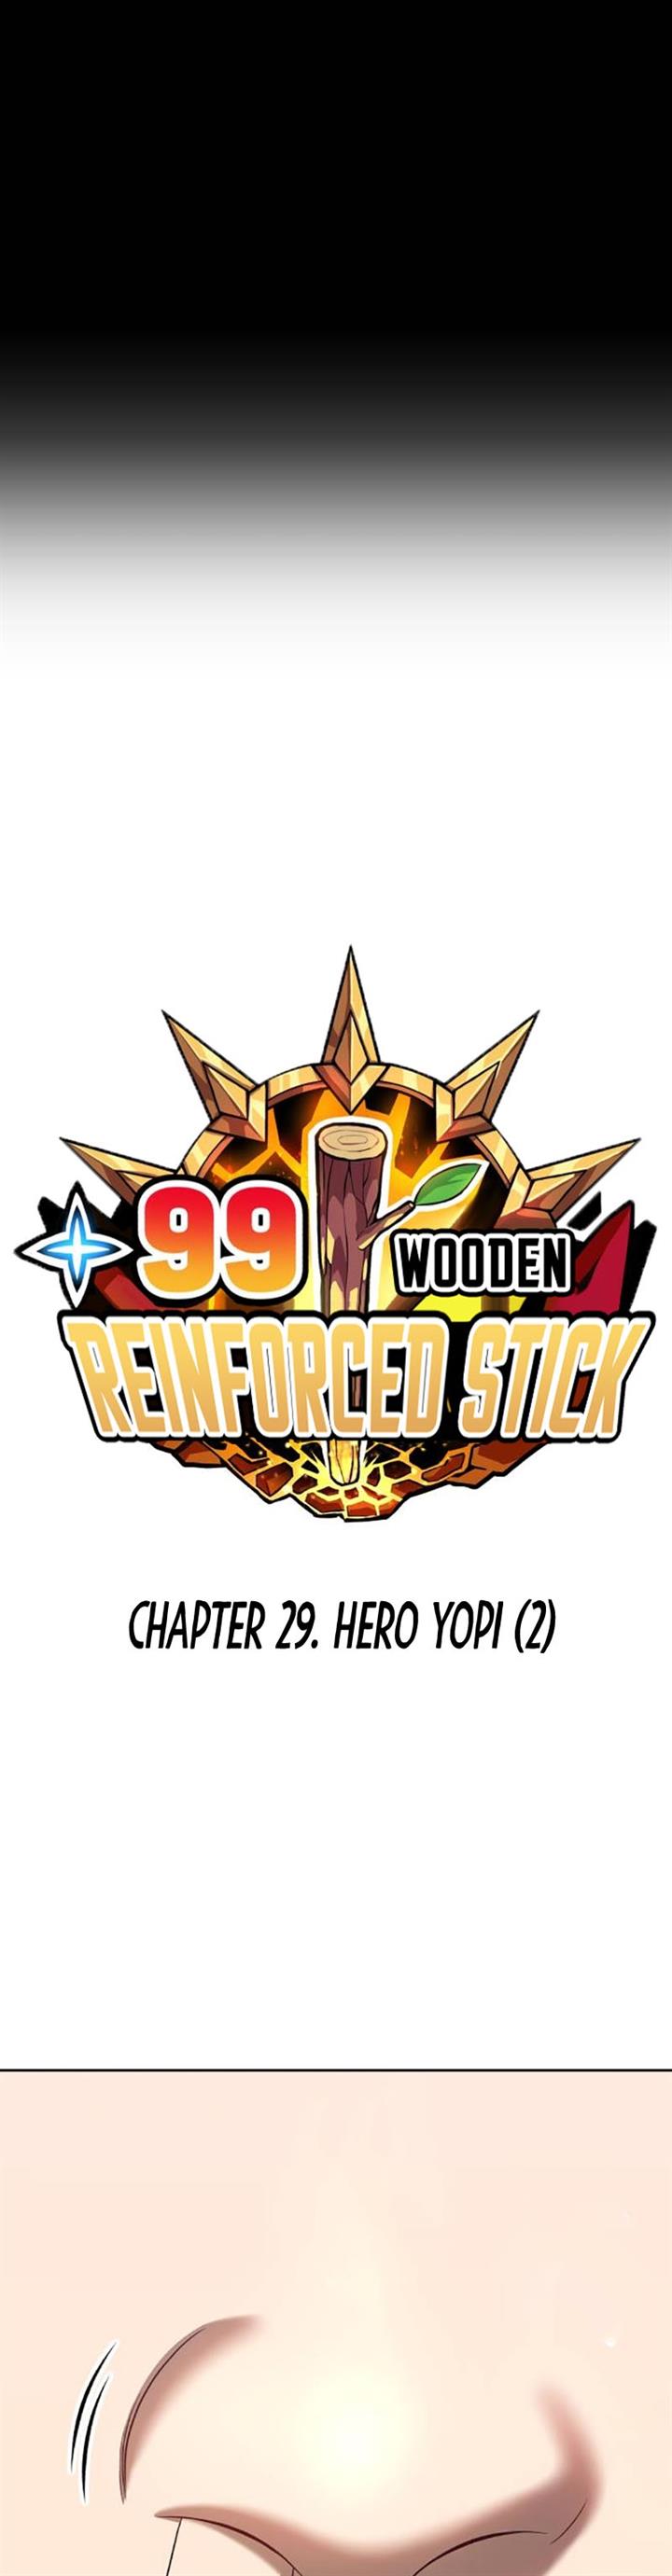 +99 Wooden Stick Chapter 29